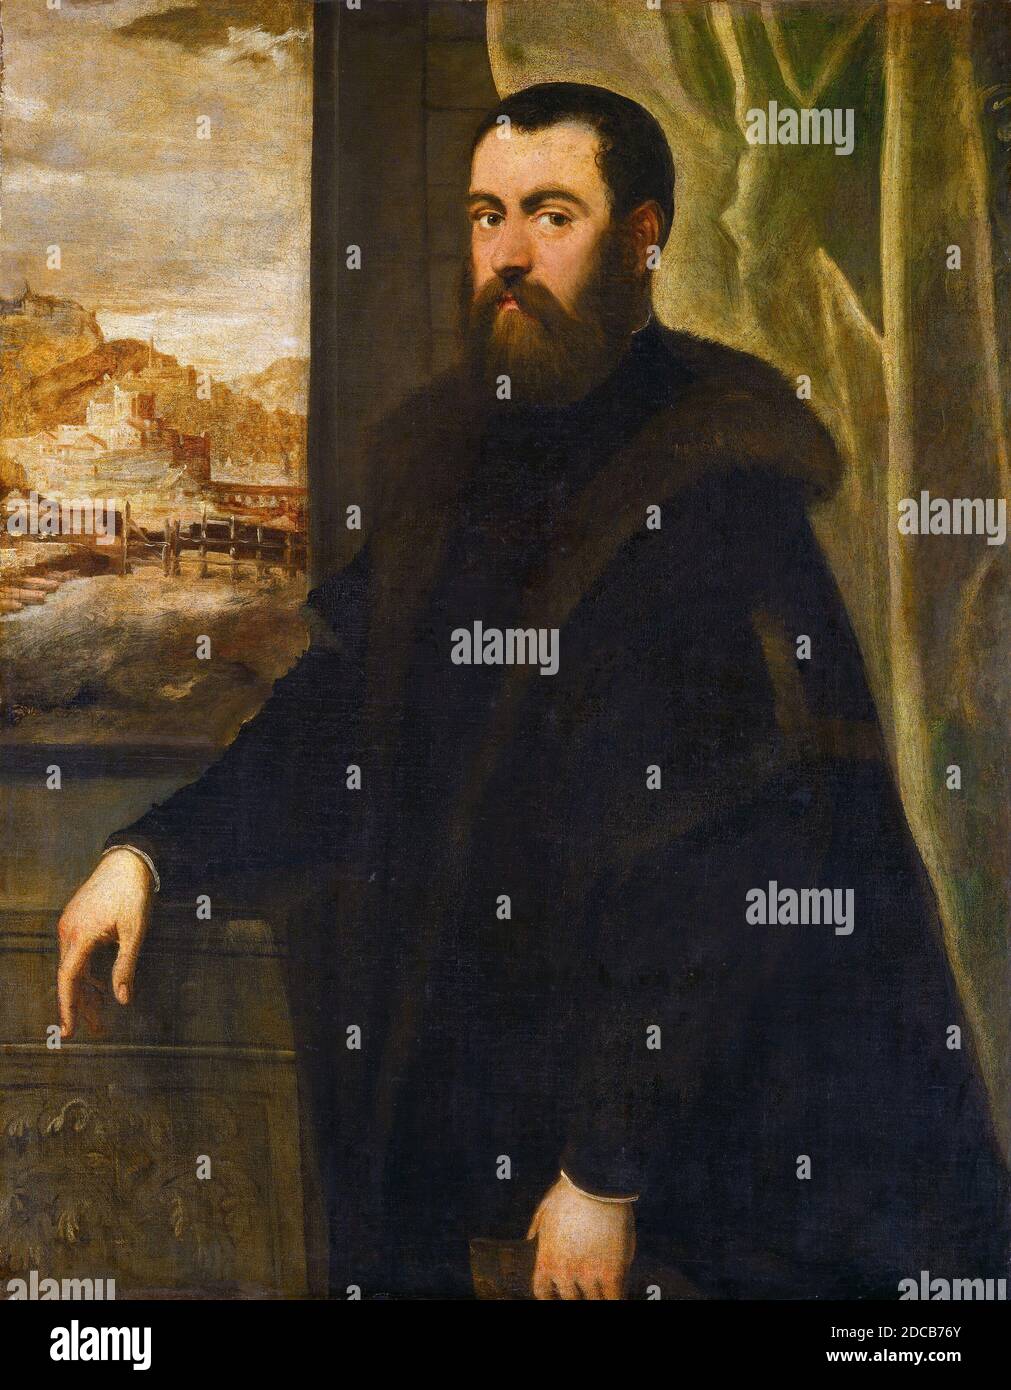 Jacopo Tintoretto, (painter), Venetian, 1518 or 1519 - 1594, Maarten de Vos, (painter), Flemish, 1532 - 1603, Portrait of a Man with a Landscape View, 1552/1556, oil on canvas, overall: 110.5 x 88 cm (43 1/2 x 34 5/8 in.), framed: 141.6 x 118.1 cm (55 3/4 x 46 1/2 in Stock Photo